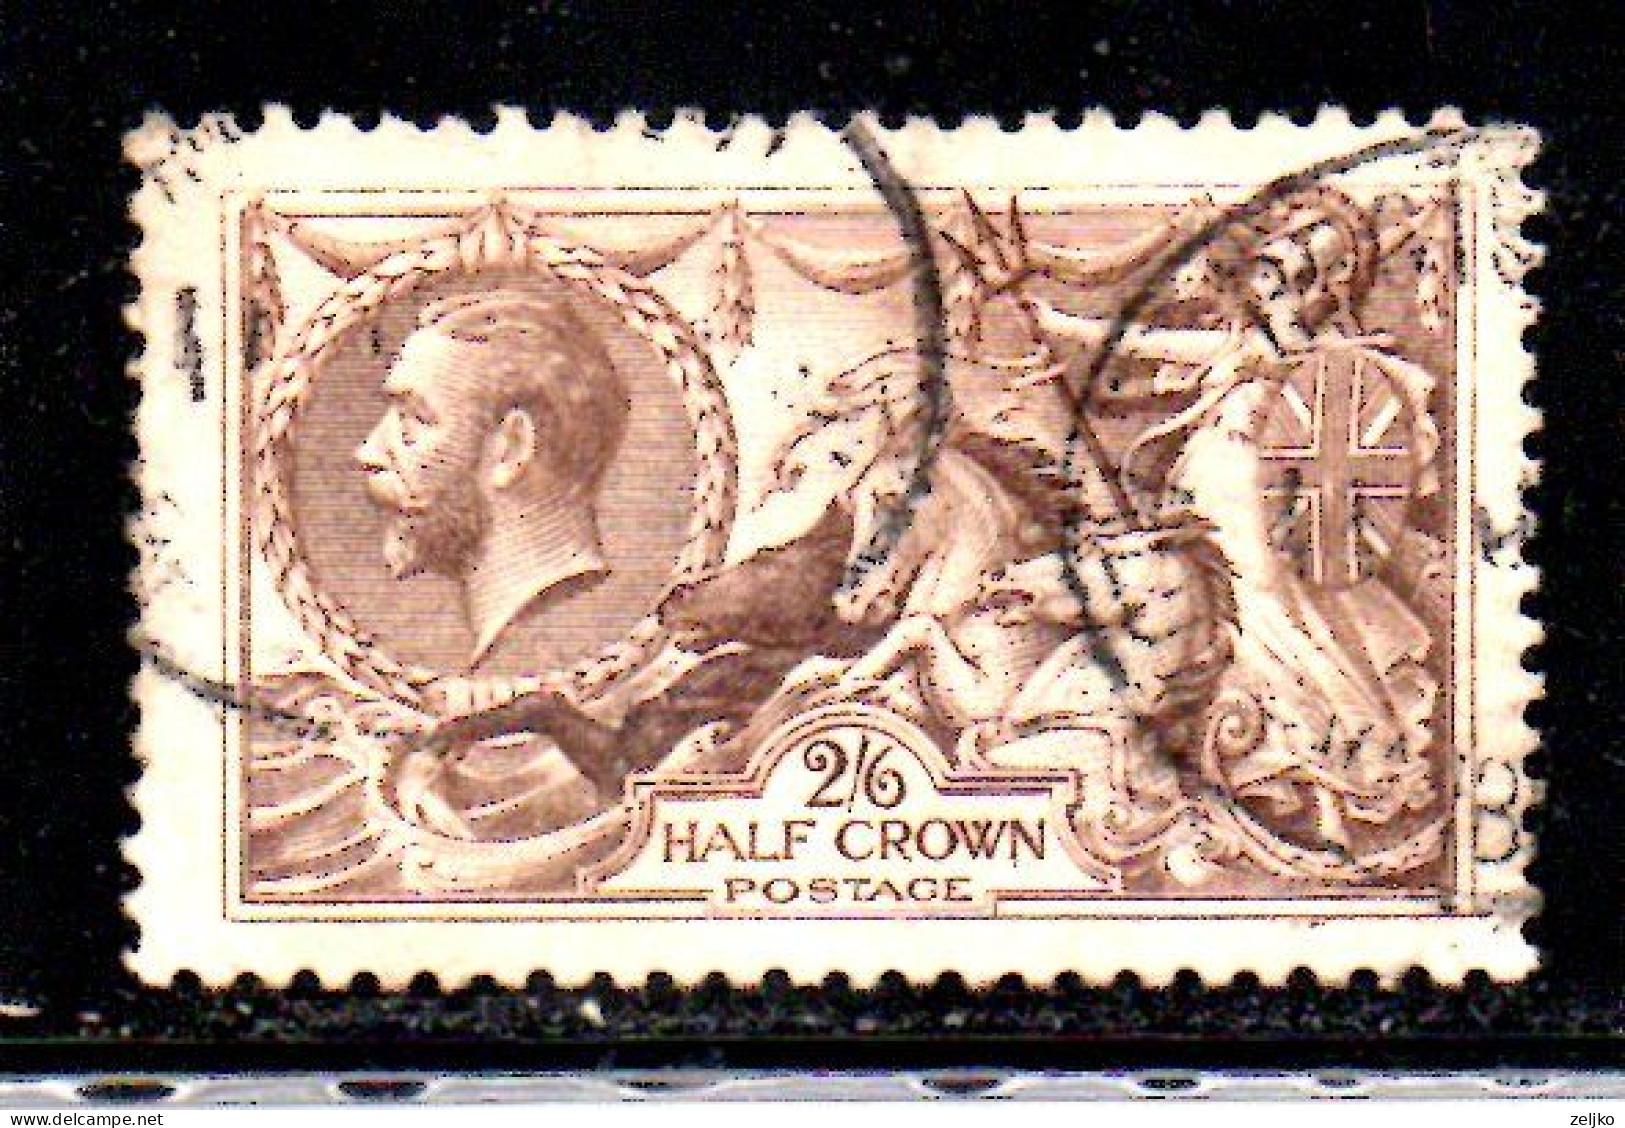 UK, GB, Great Britain, Used, 1918, Michel 141 III,height 22 1_2, George V, Seahorse, (M) - Used Stamps